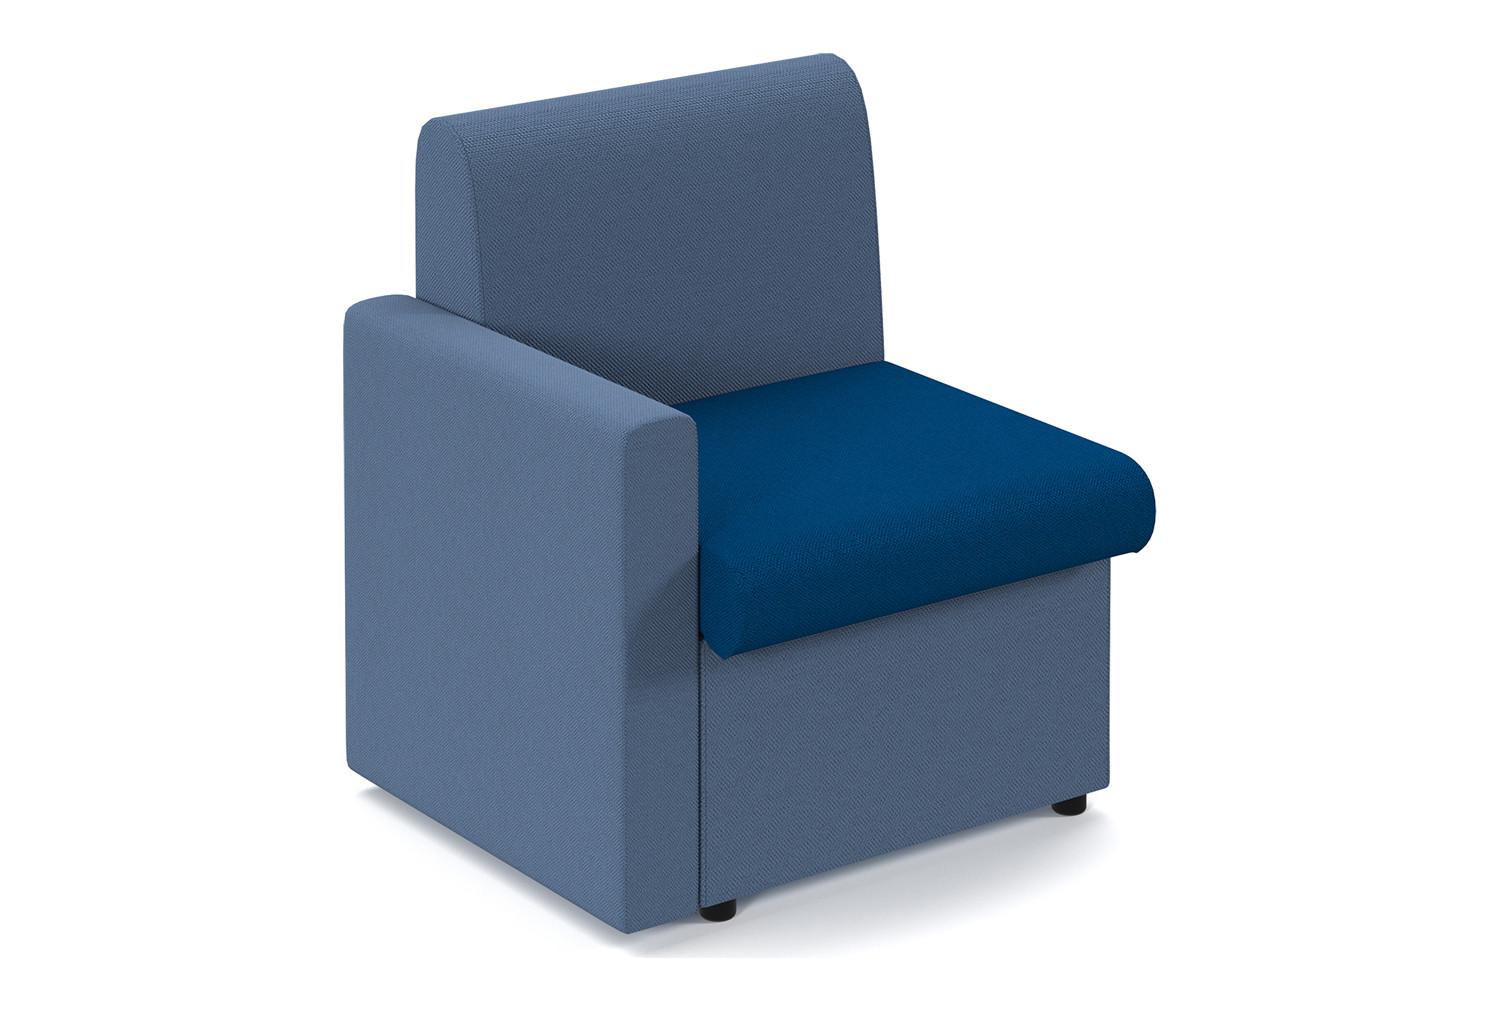 Portland 2 Tone Modular Soft Seating, Chair With Right Arm, Maturity Blue Seat/Range Blue Back